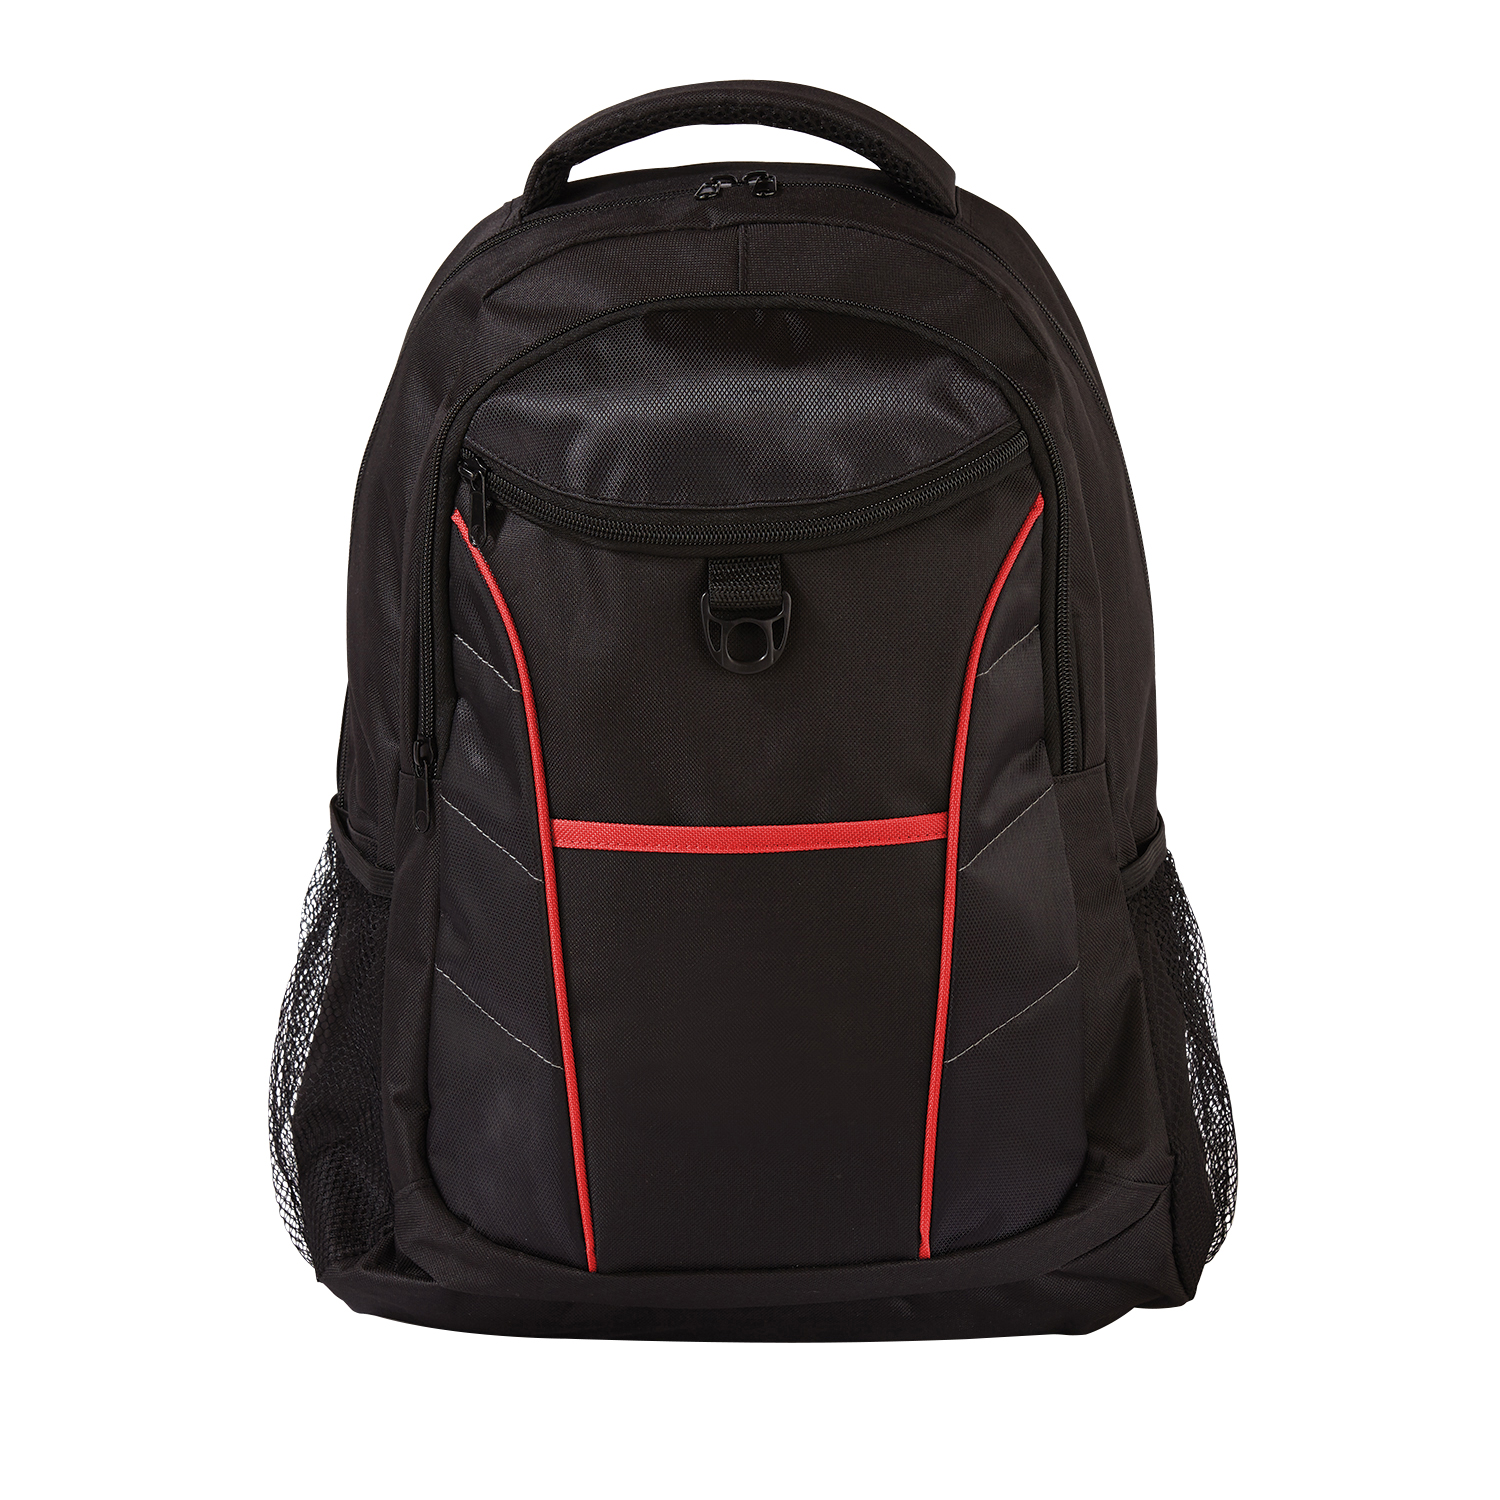 The Sport Backpack | The Magnet Group